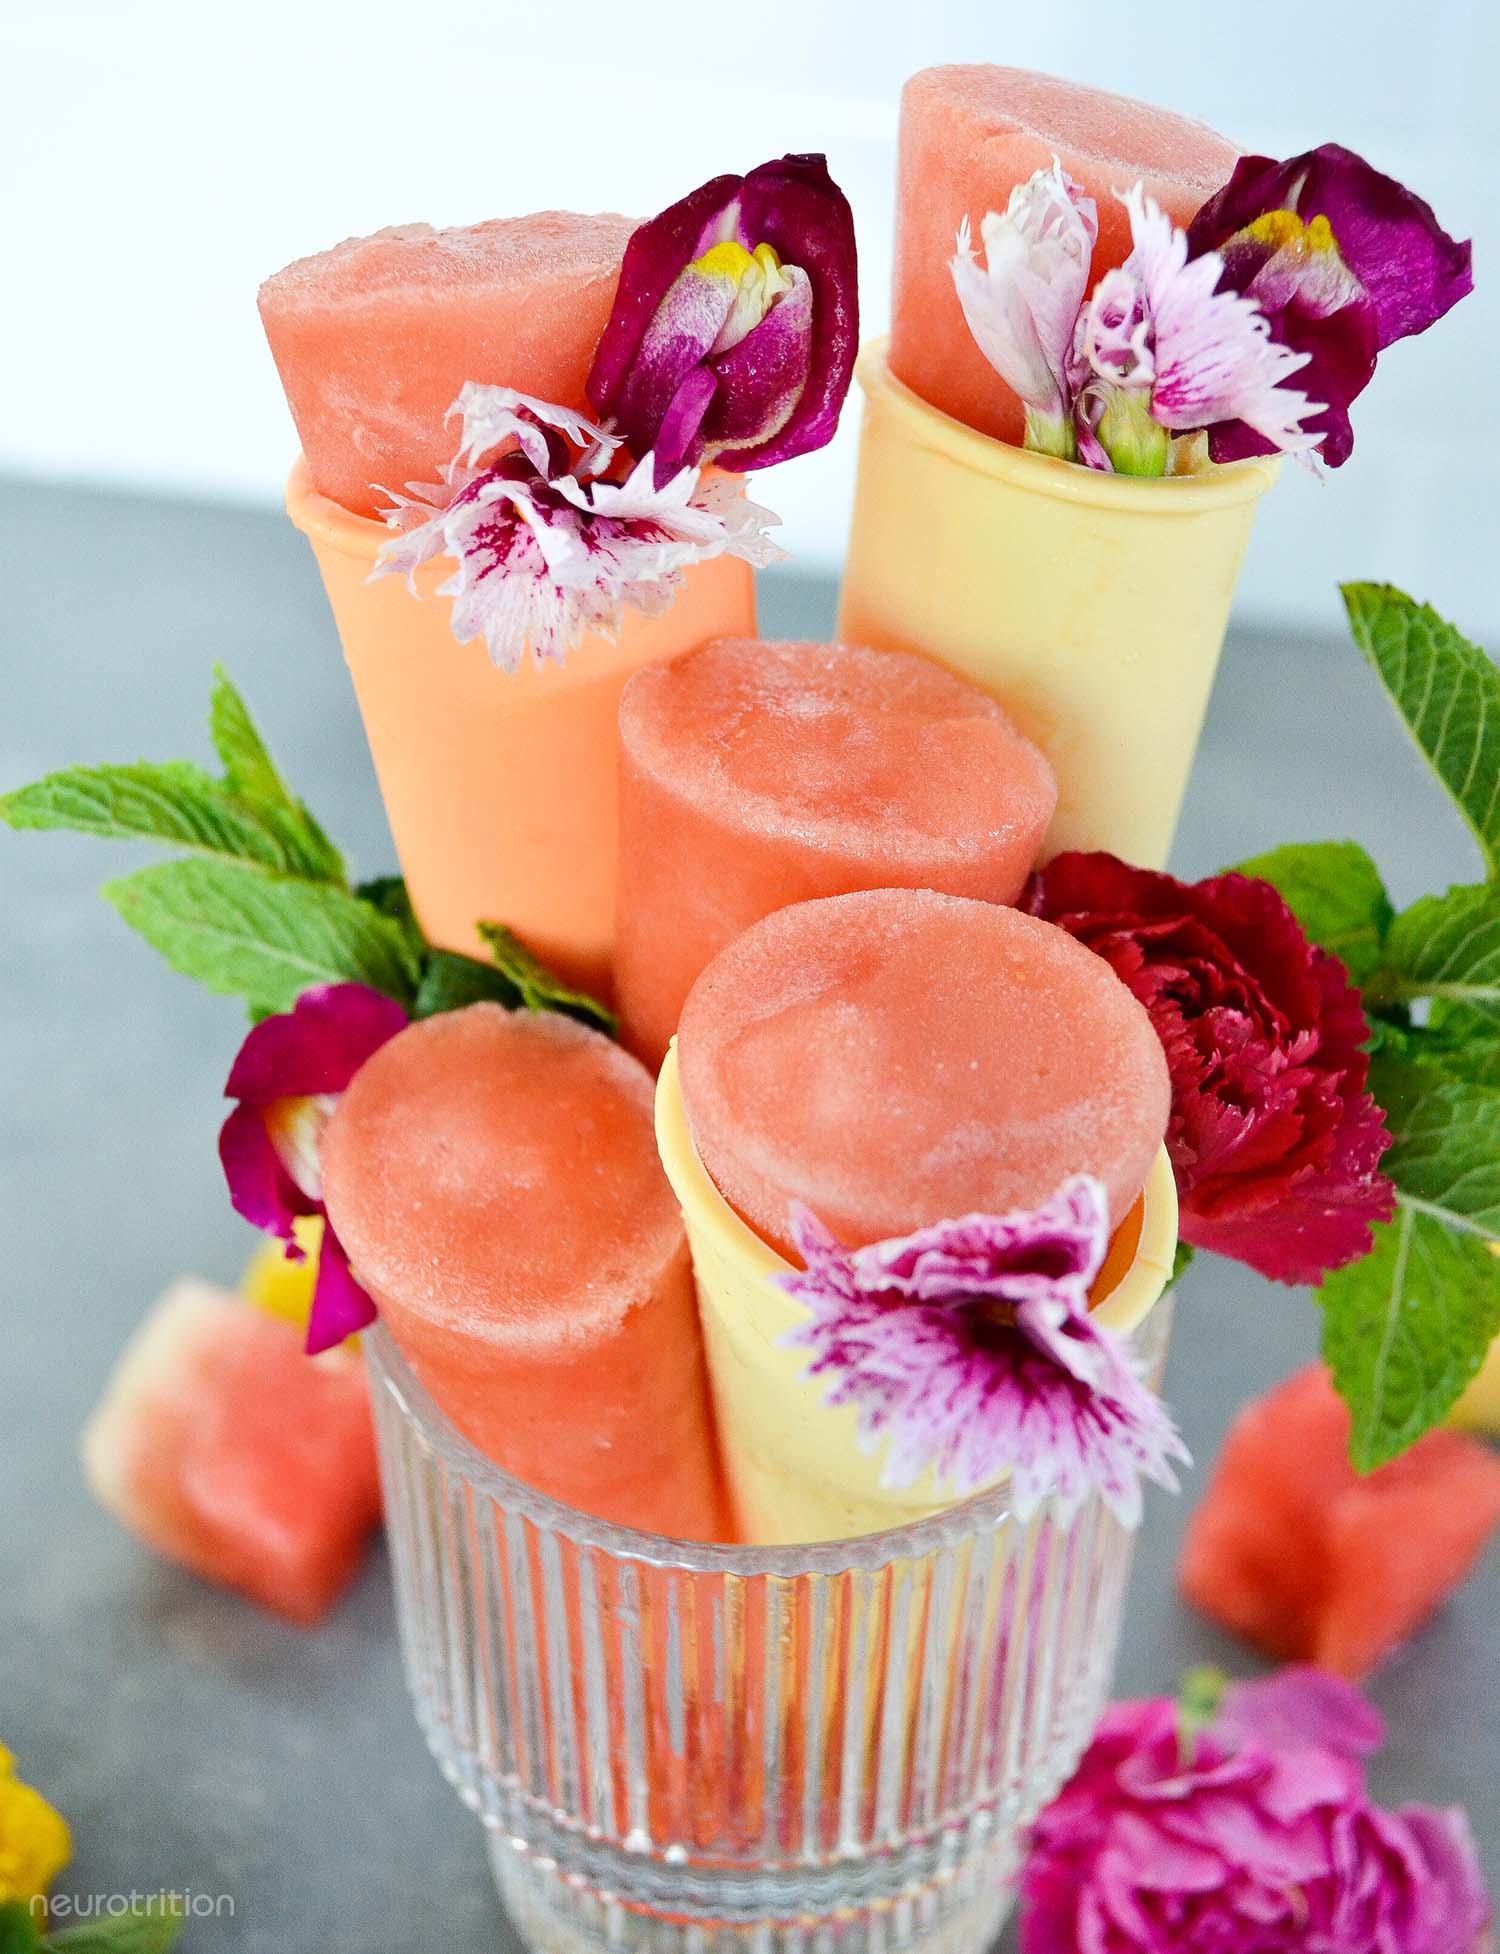 Five homemade pink popsicles in a glass, garnished with edible flowers and fresh mint.